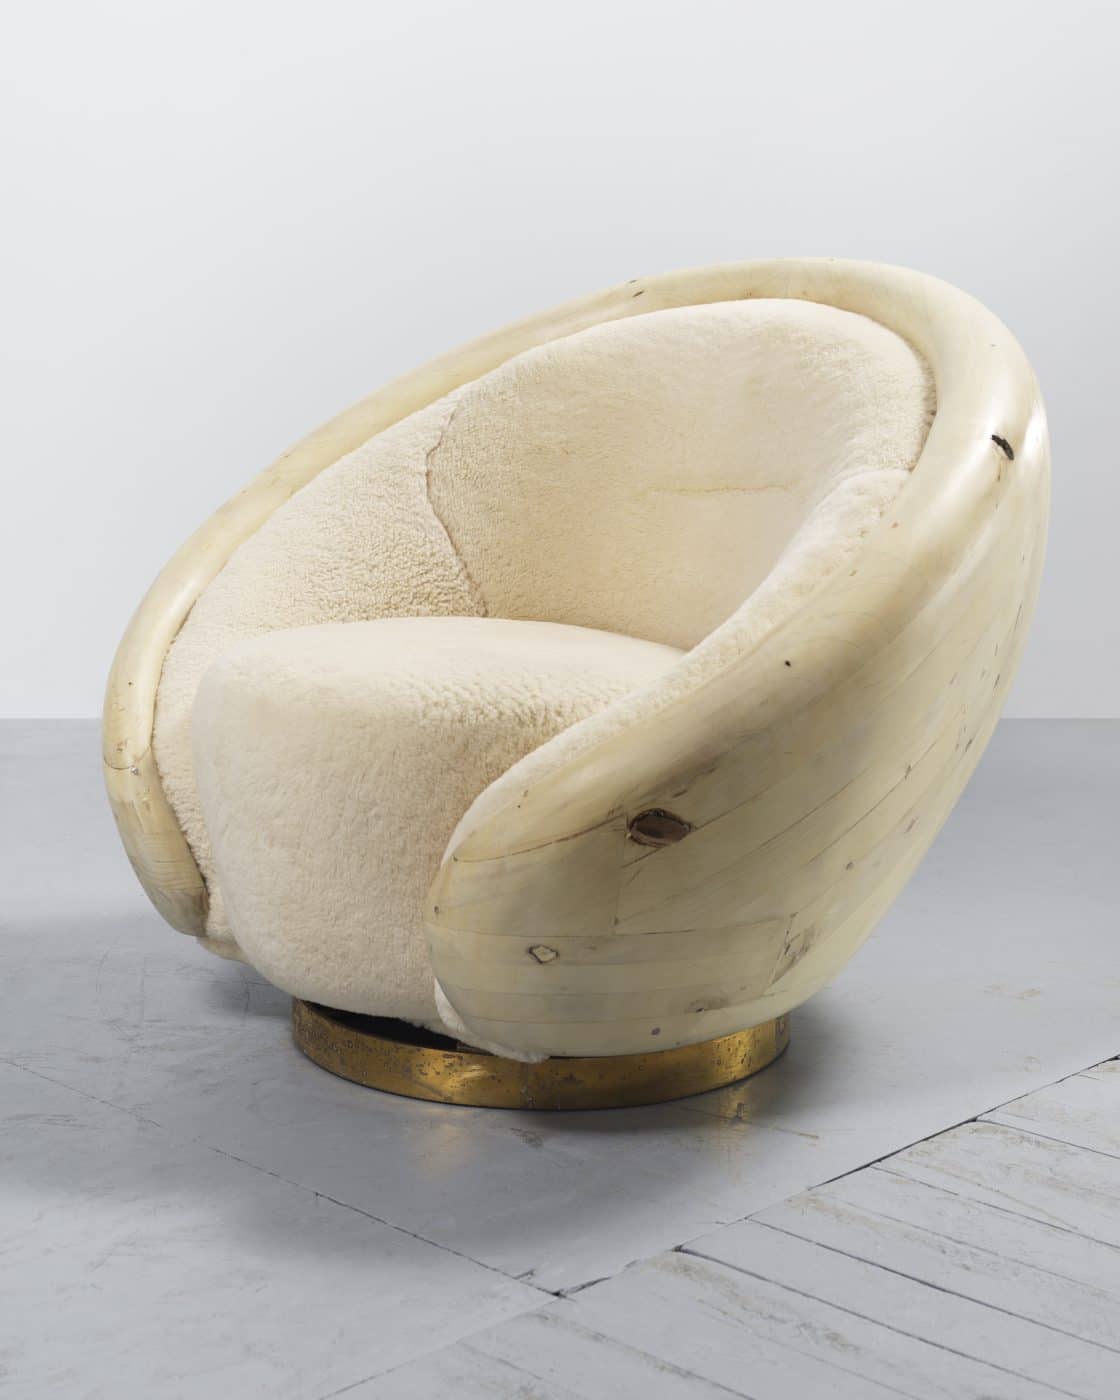 Rogan Gregory's Brioche chair, with ivory shearling upholstery, a wood back, and a bronze swivel base